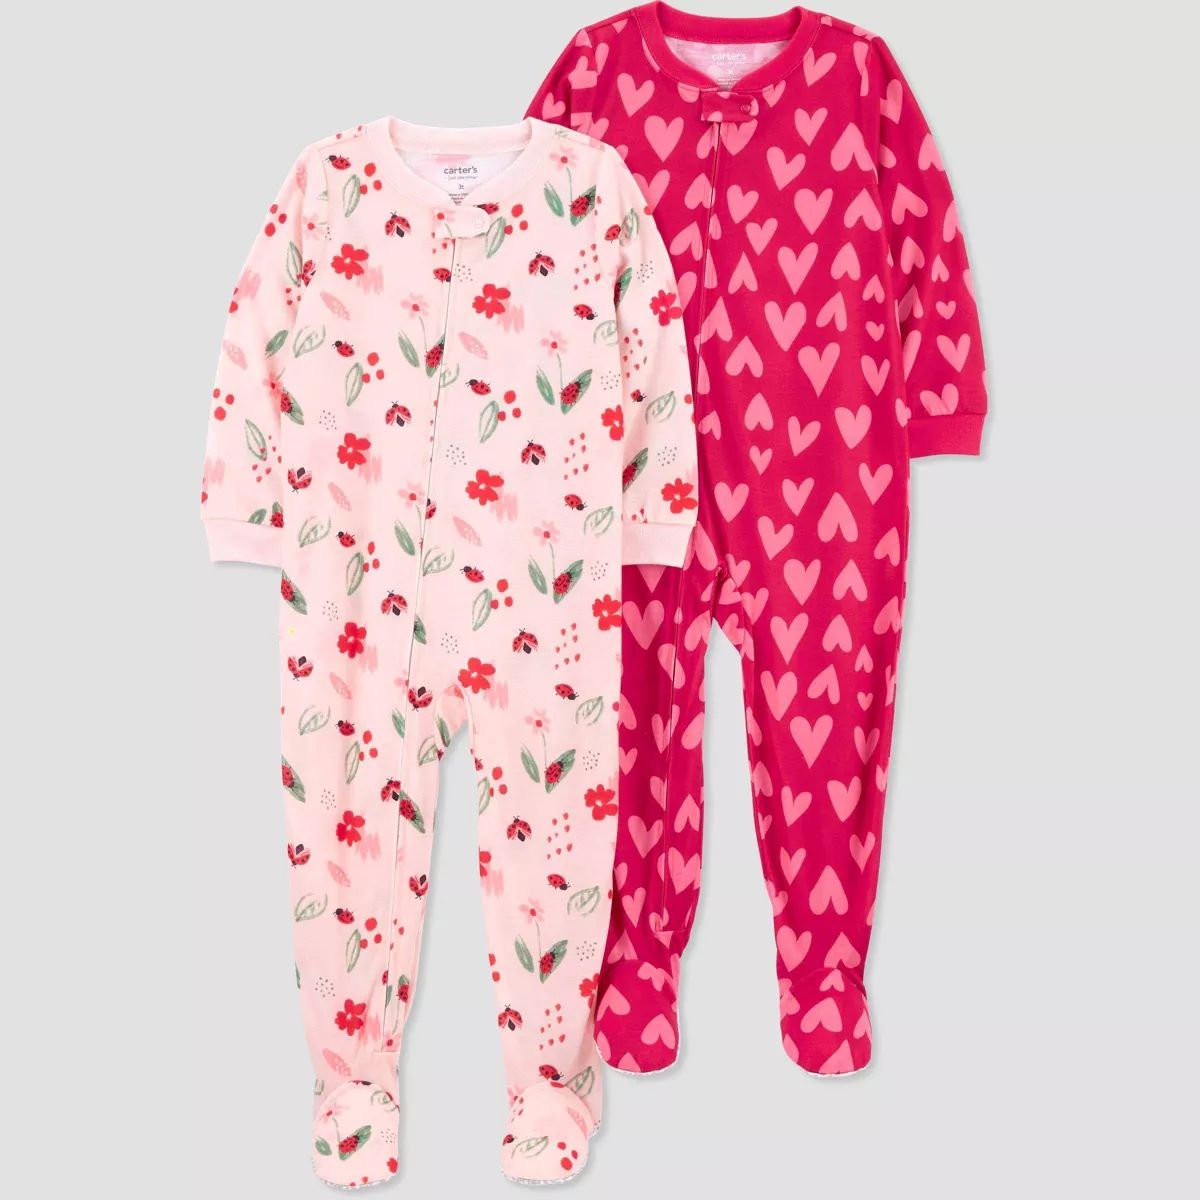 Carter's Just One You® Toddler Girls' Hearts & Floral Printed Footed Pajamas - Red/Pink | Target